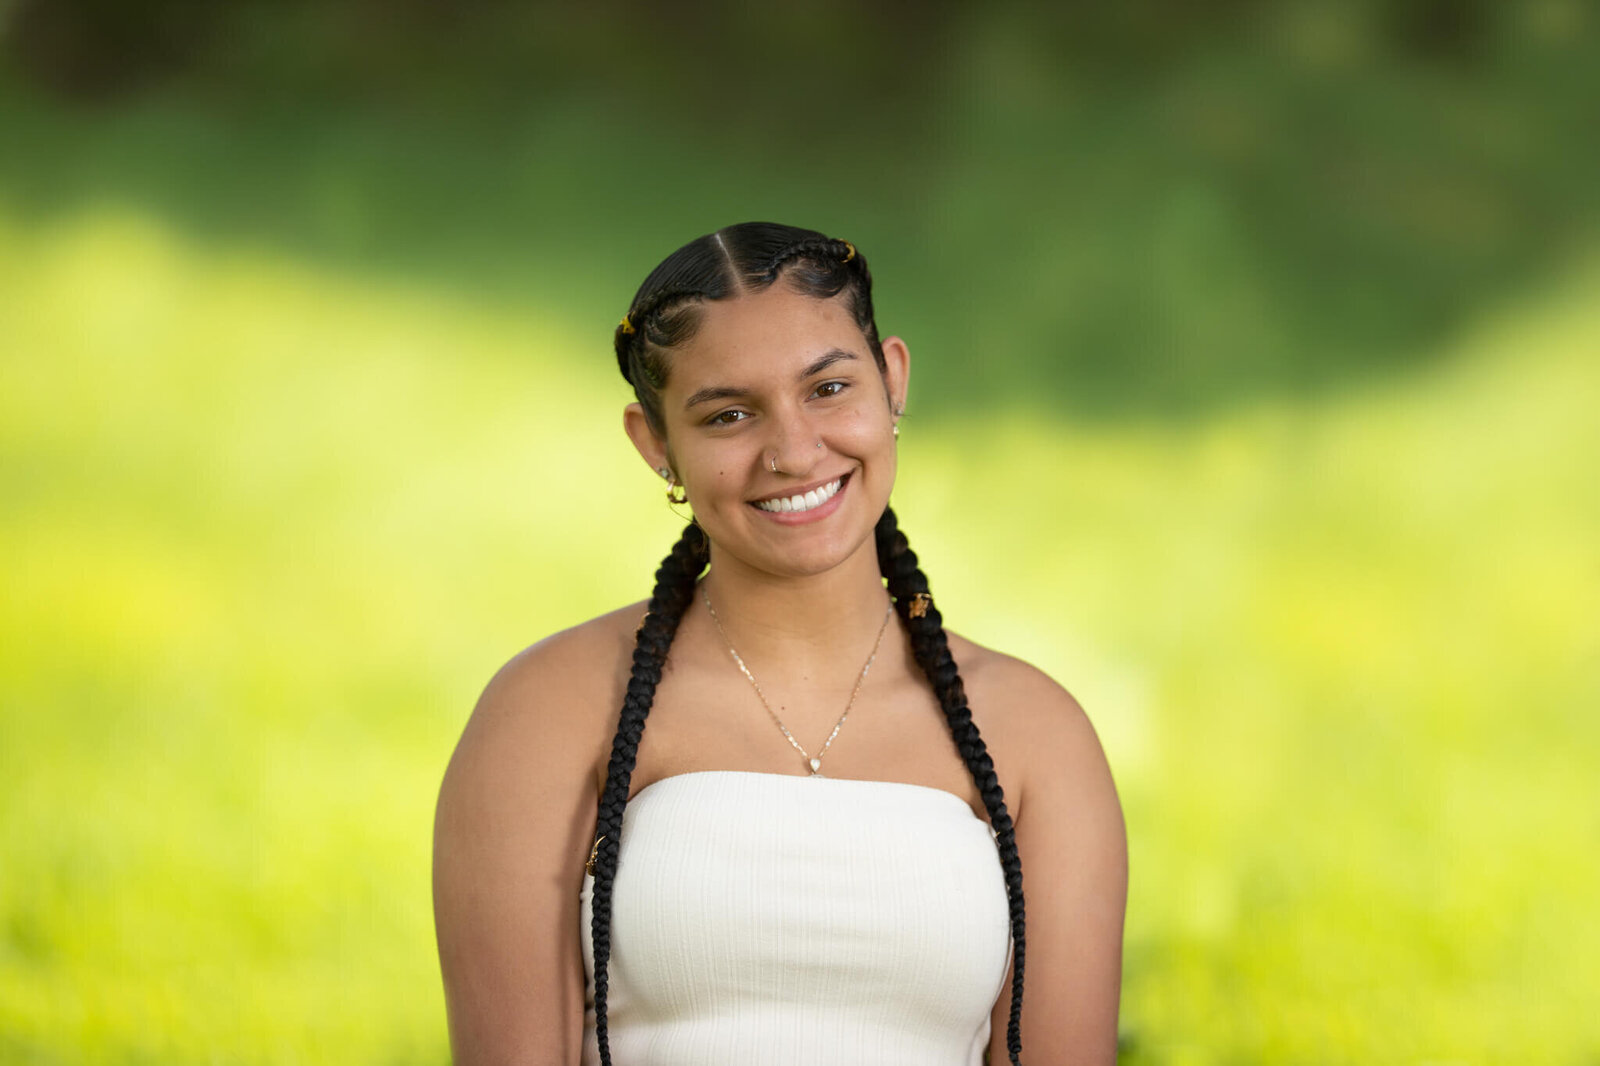 High school senior portrait photography in Clinton MA  of female with two long braids and a silver necklace